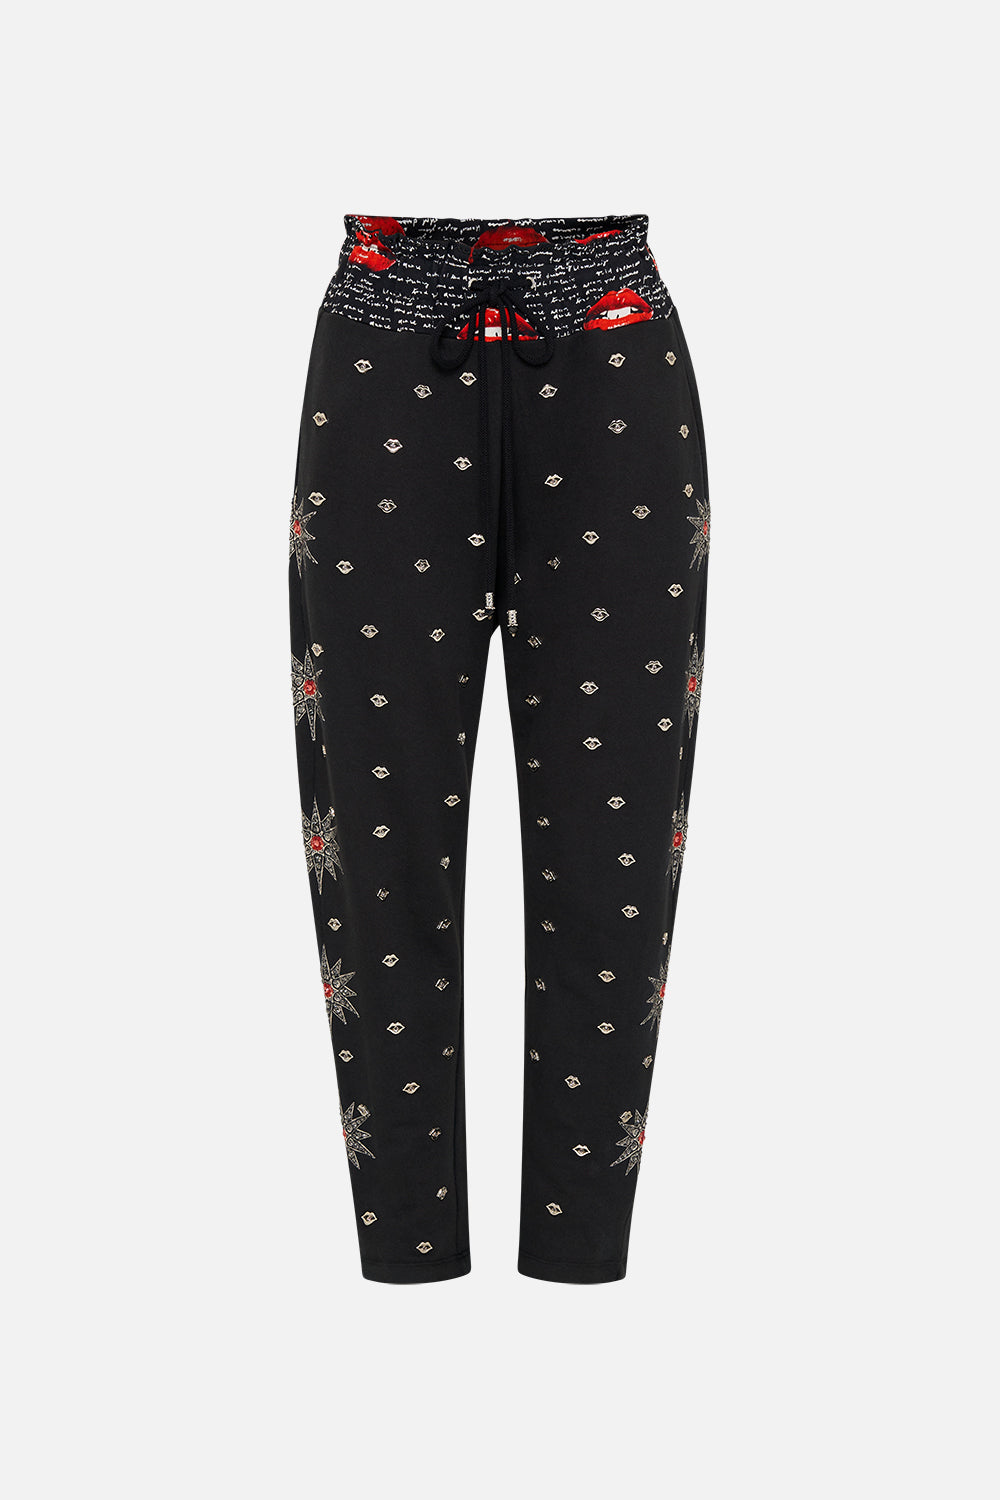 Product view of CAMILLA black trackpants in Chaos Magic print